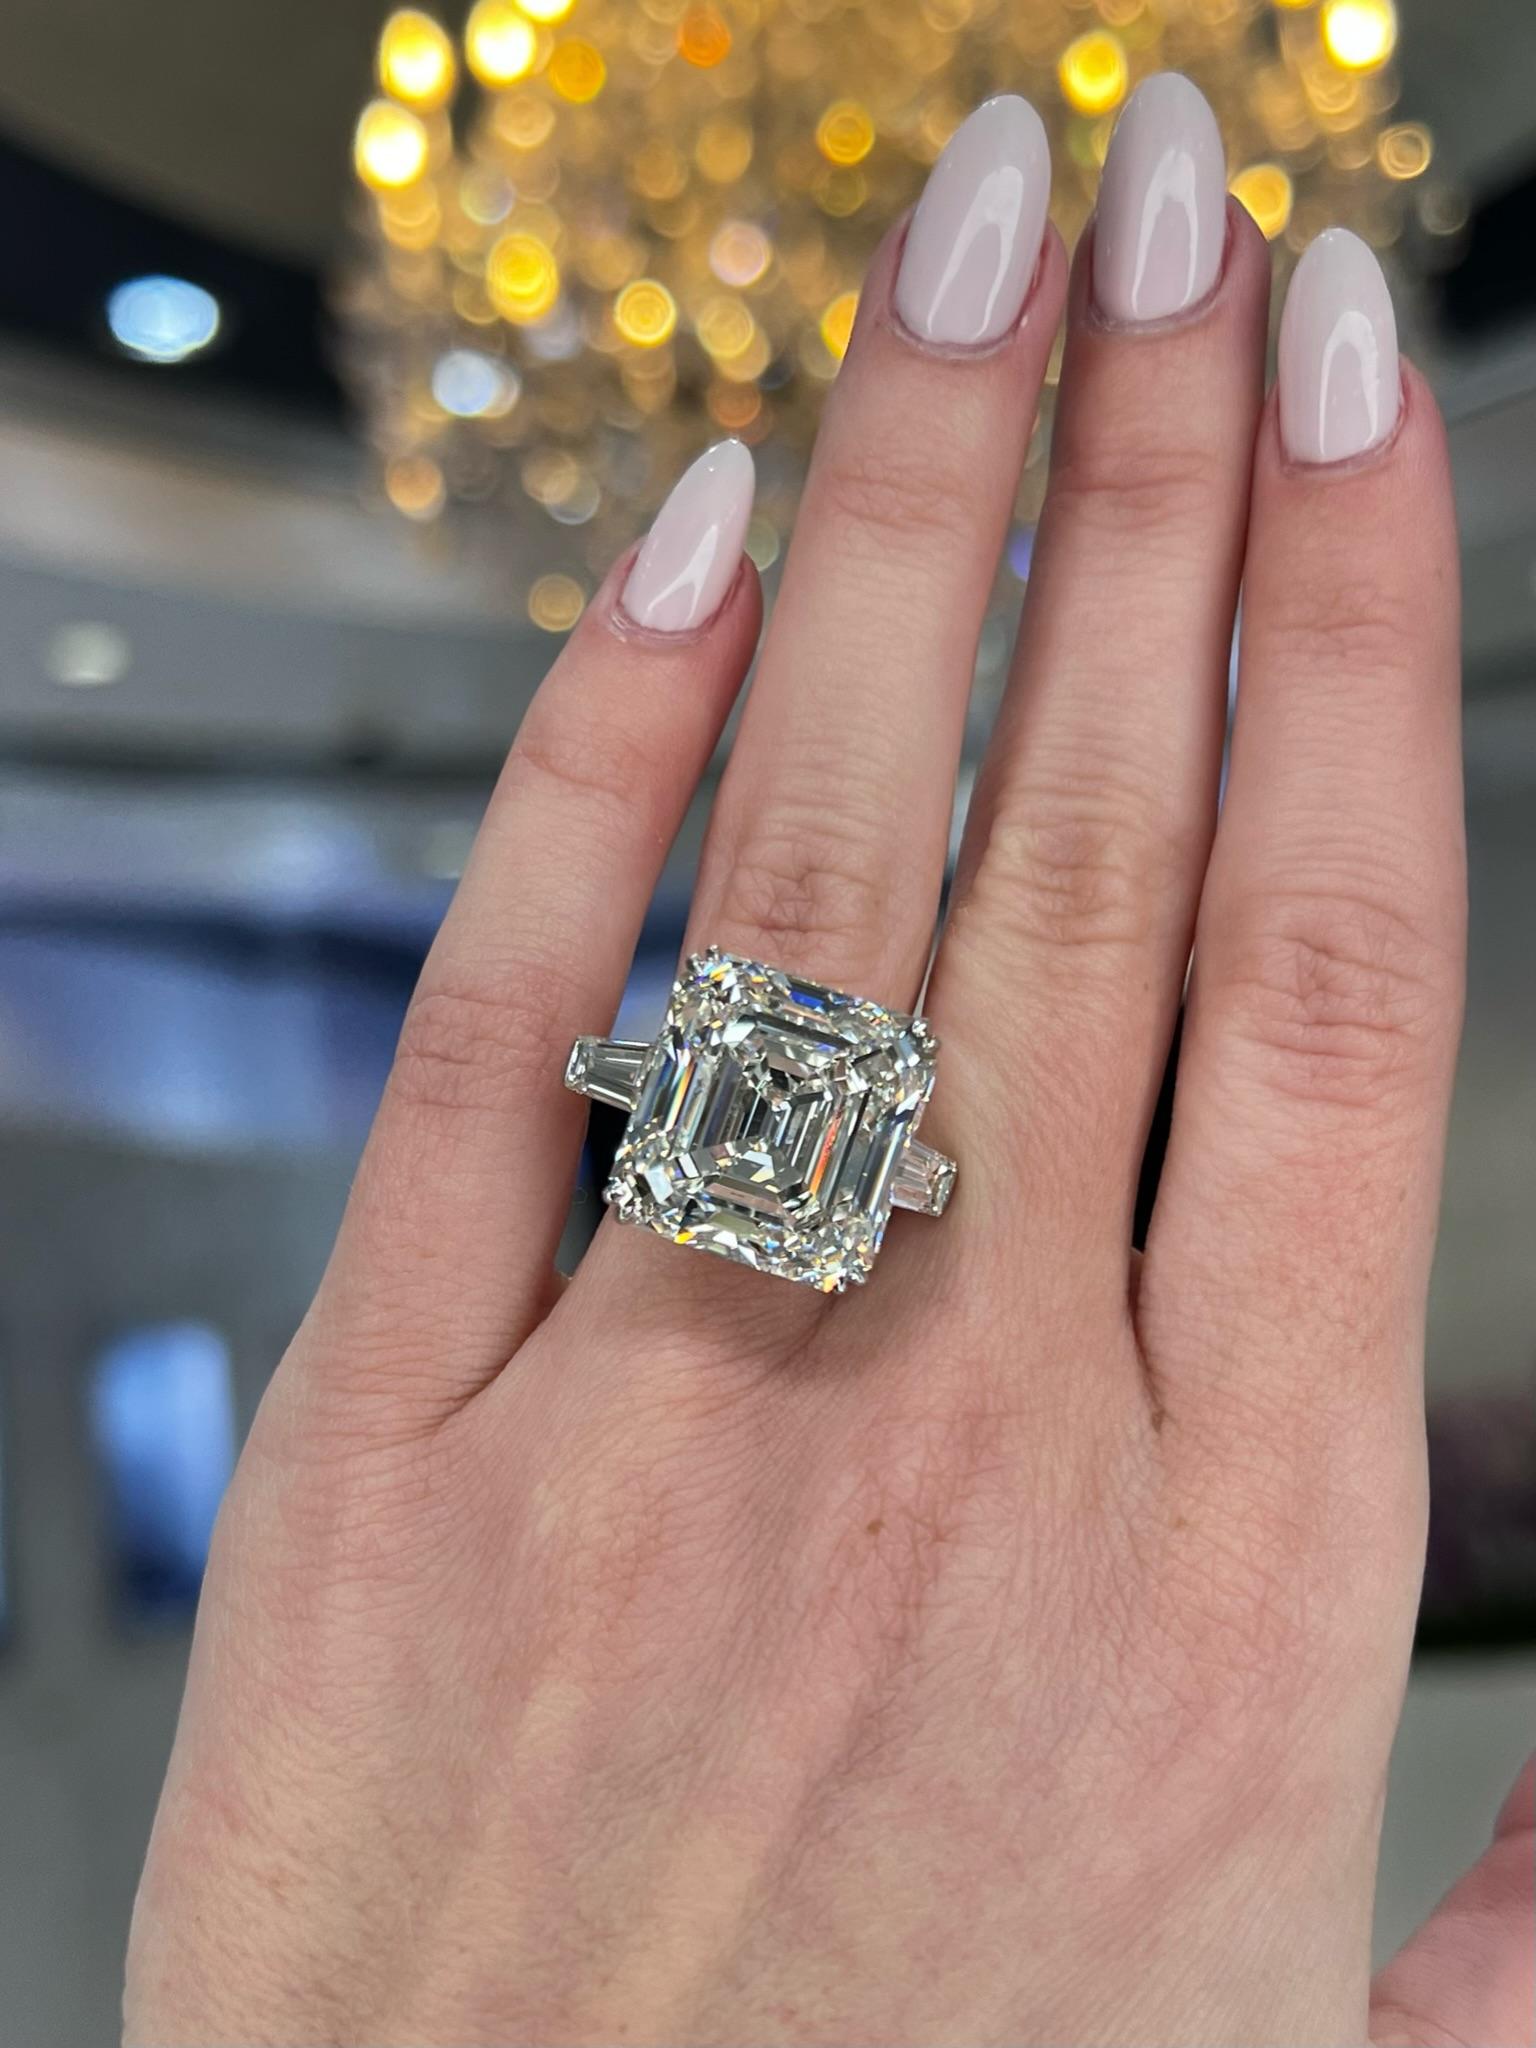 David Rosenberg 22.18 Carat Asscher Cut GIA Three Stone Diamond Engagement Ring In New Condition For Sale In Boca Raton, FL